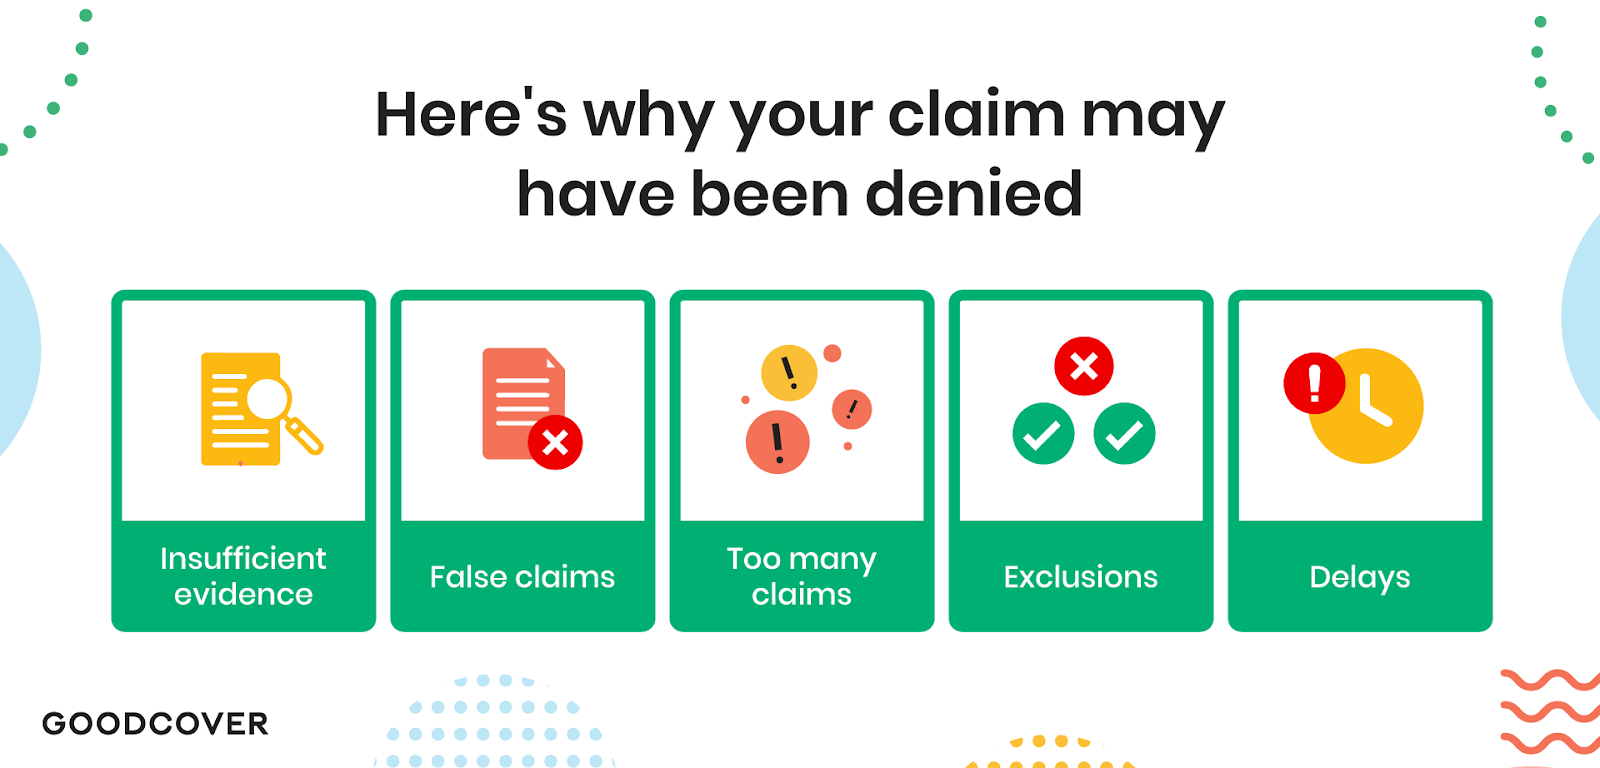 Goodcover’s Guide To Claim Delays, Denials, and How To Avoid Both